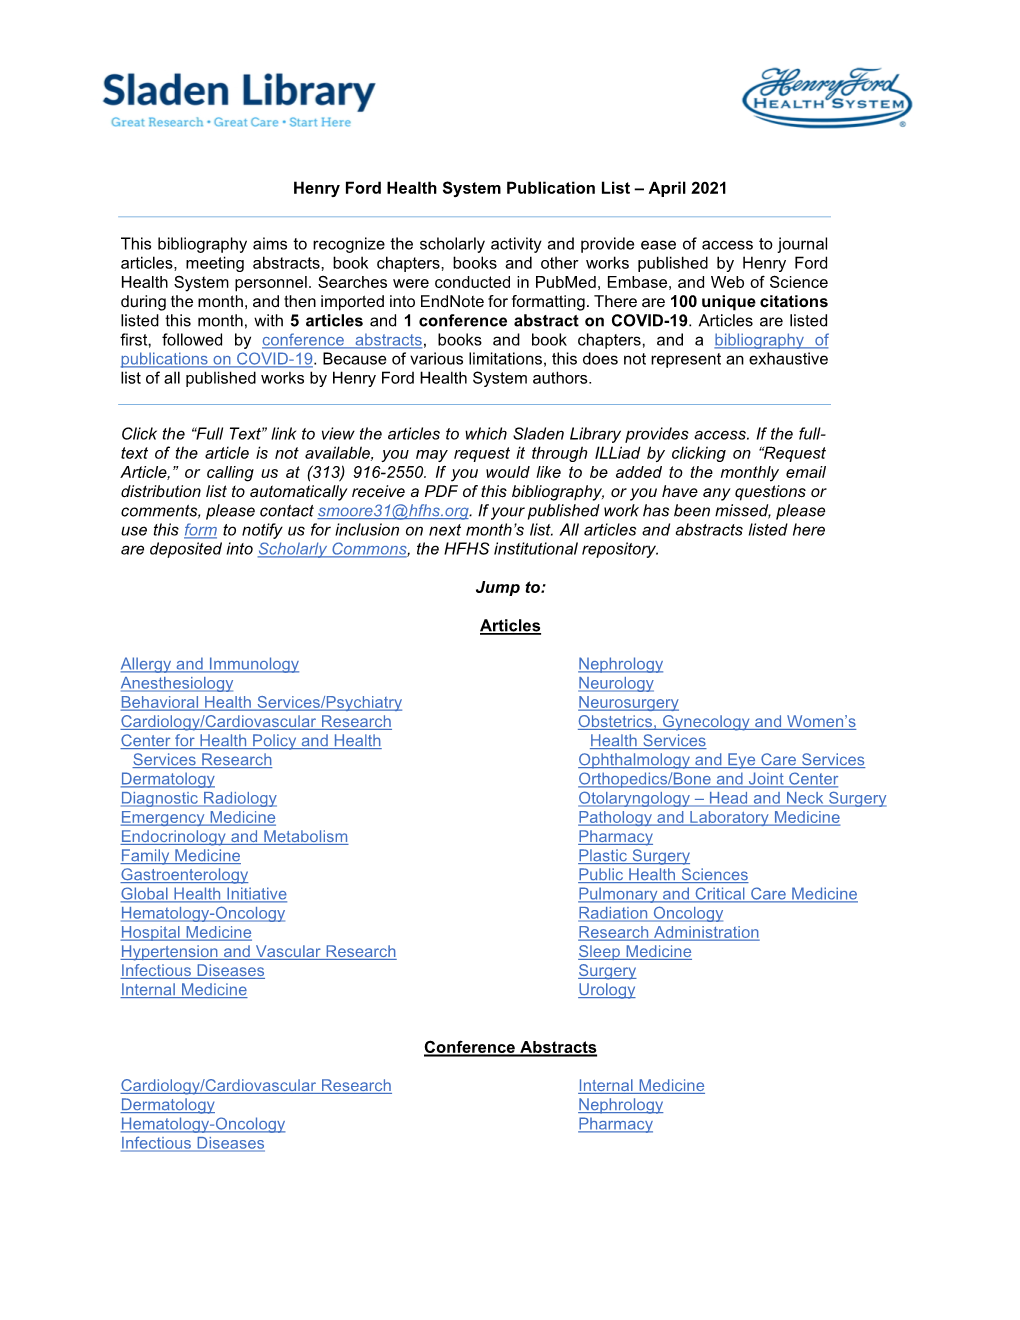 19F Henry Ford Health System Publication List – April 2021 This Bibliography Aims to Recognize the Scholarly Activity and Prov